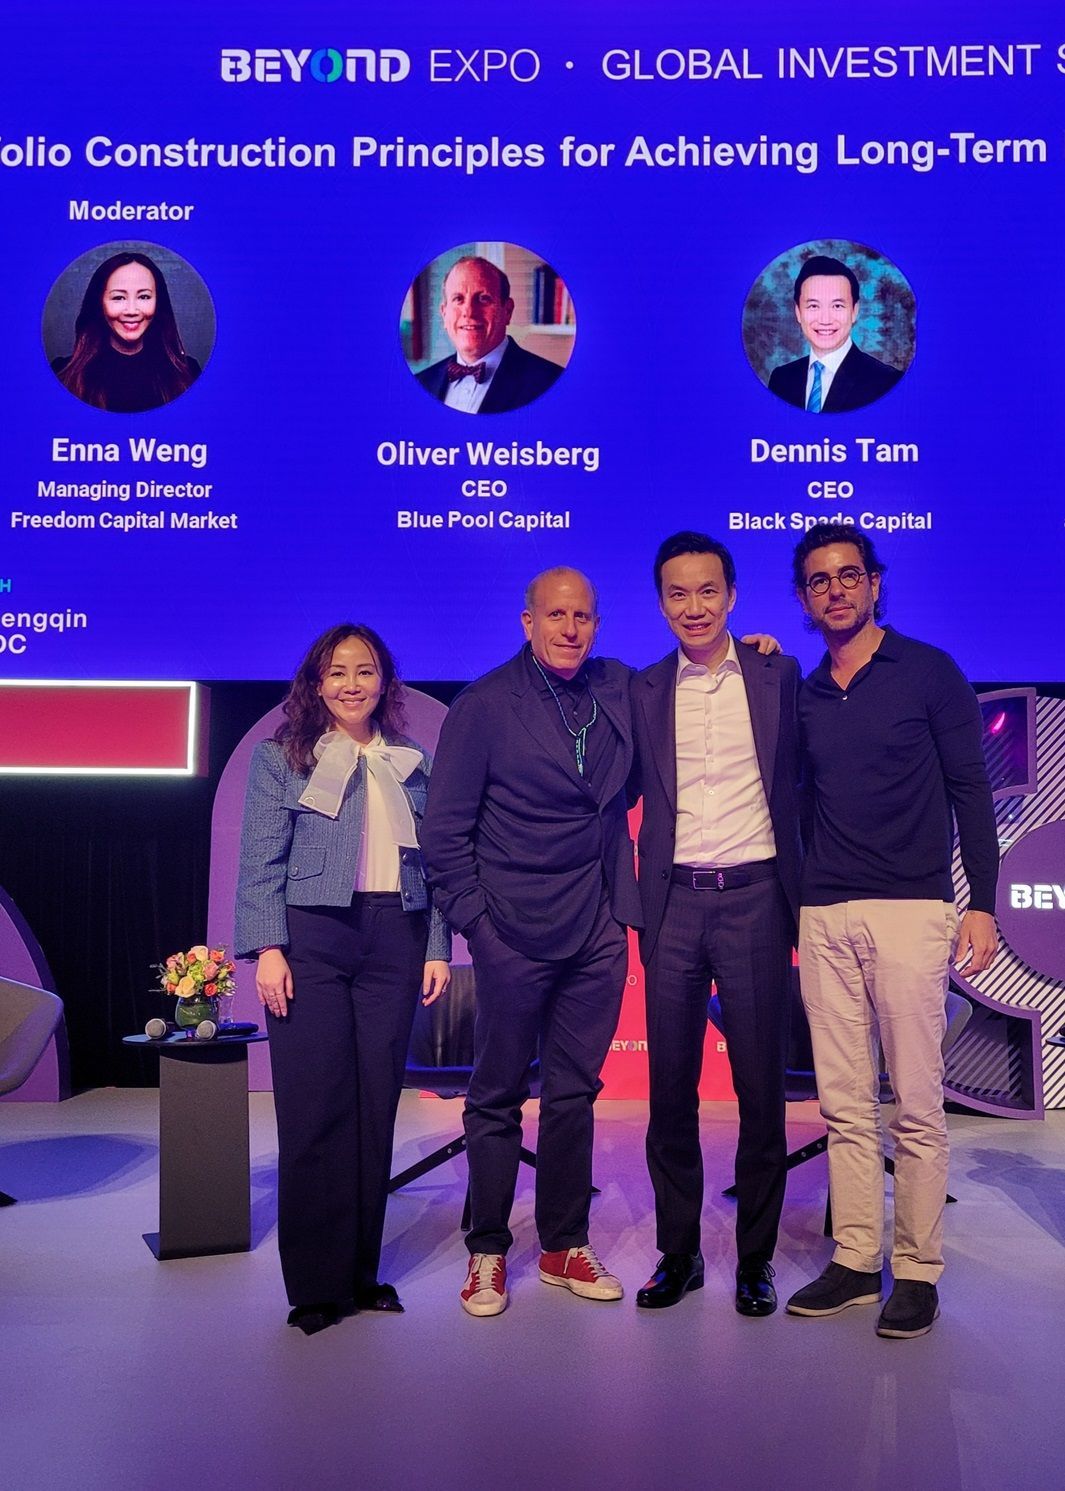 (From left) Ms. Enna Weng, Managing Director of Freedom Capital Markets, Mr. Oliver Weisberg, Chief Executive Officer of Blue Pool Capital, Mr. Dennis Tam, President and CEO of Black Spade and Mr. Mario Moraes of Votorantim Group